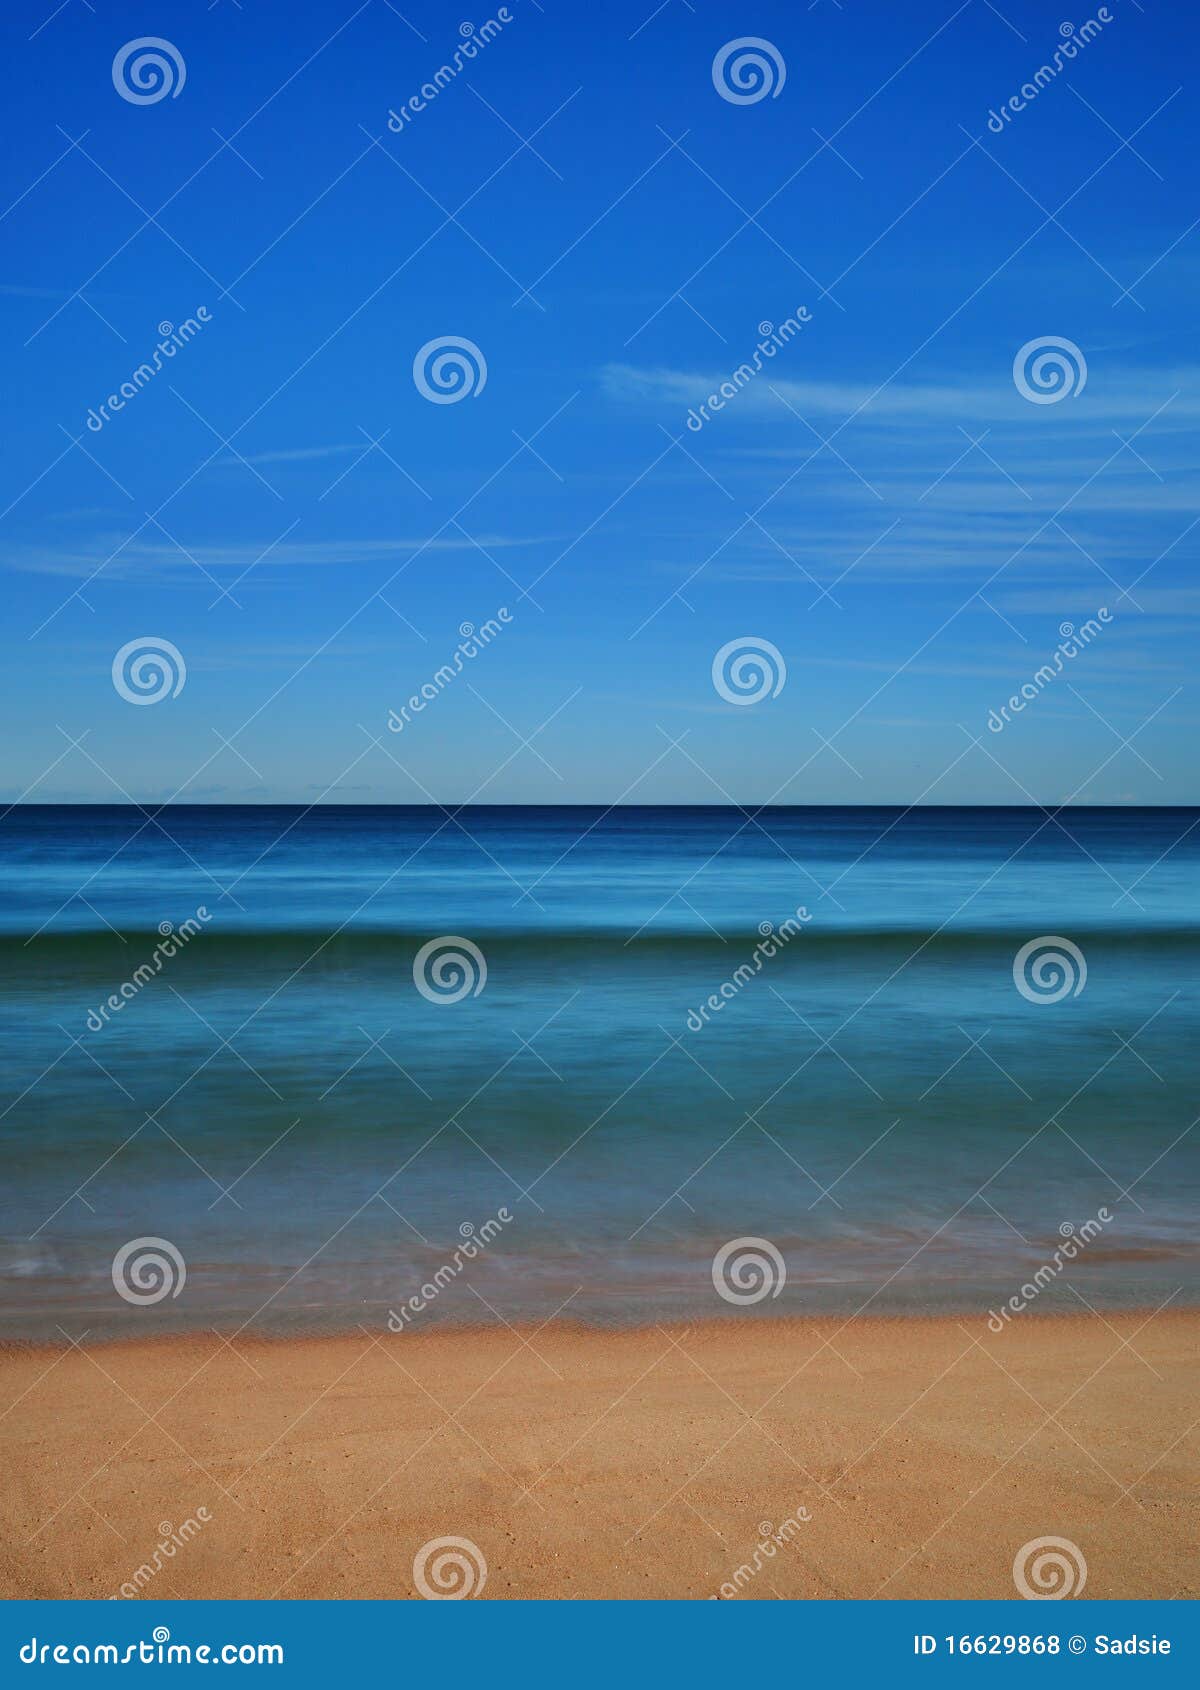 Summer dreaming stock photo. Image of beautiful, colorful - 16629868